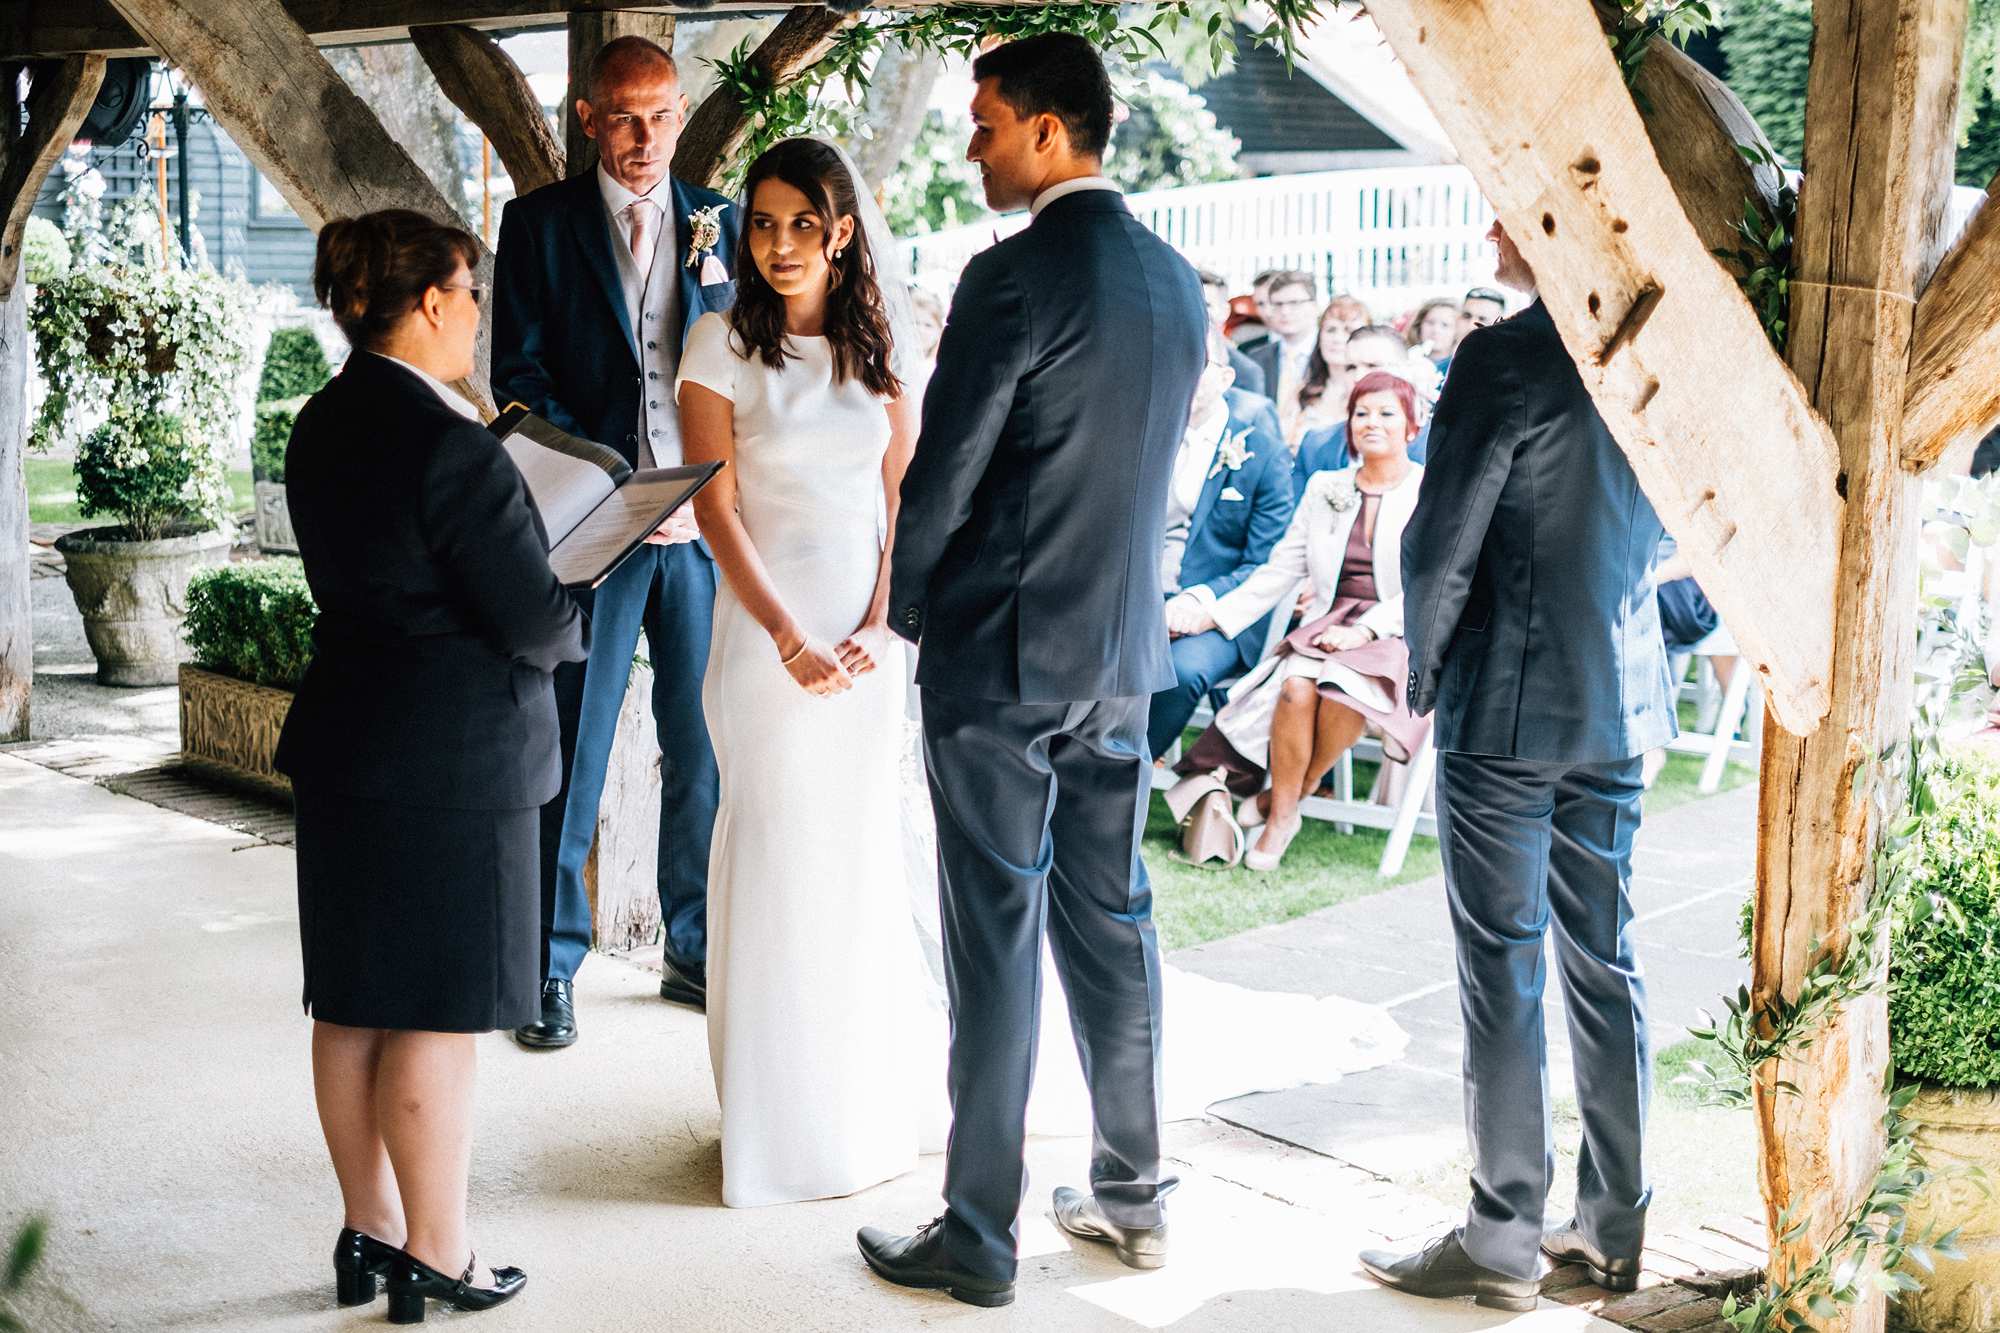 Gorgeous June wedding at Winters Barns